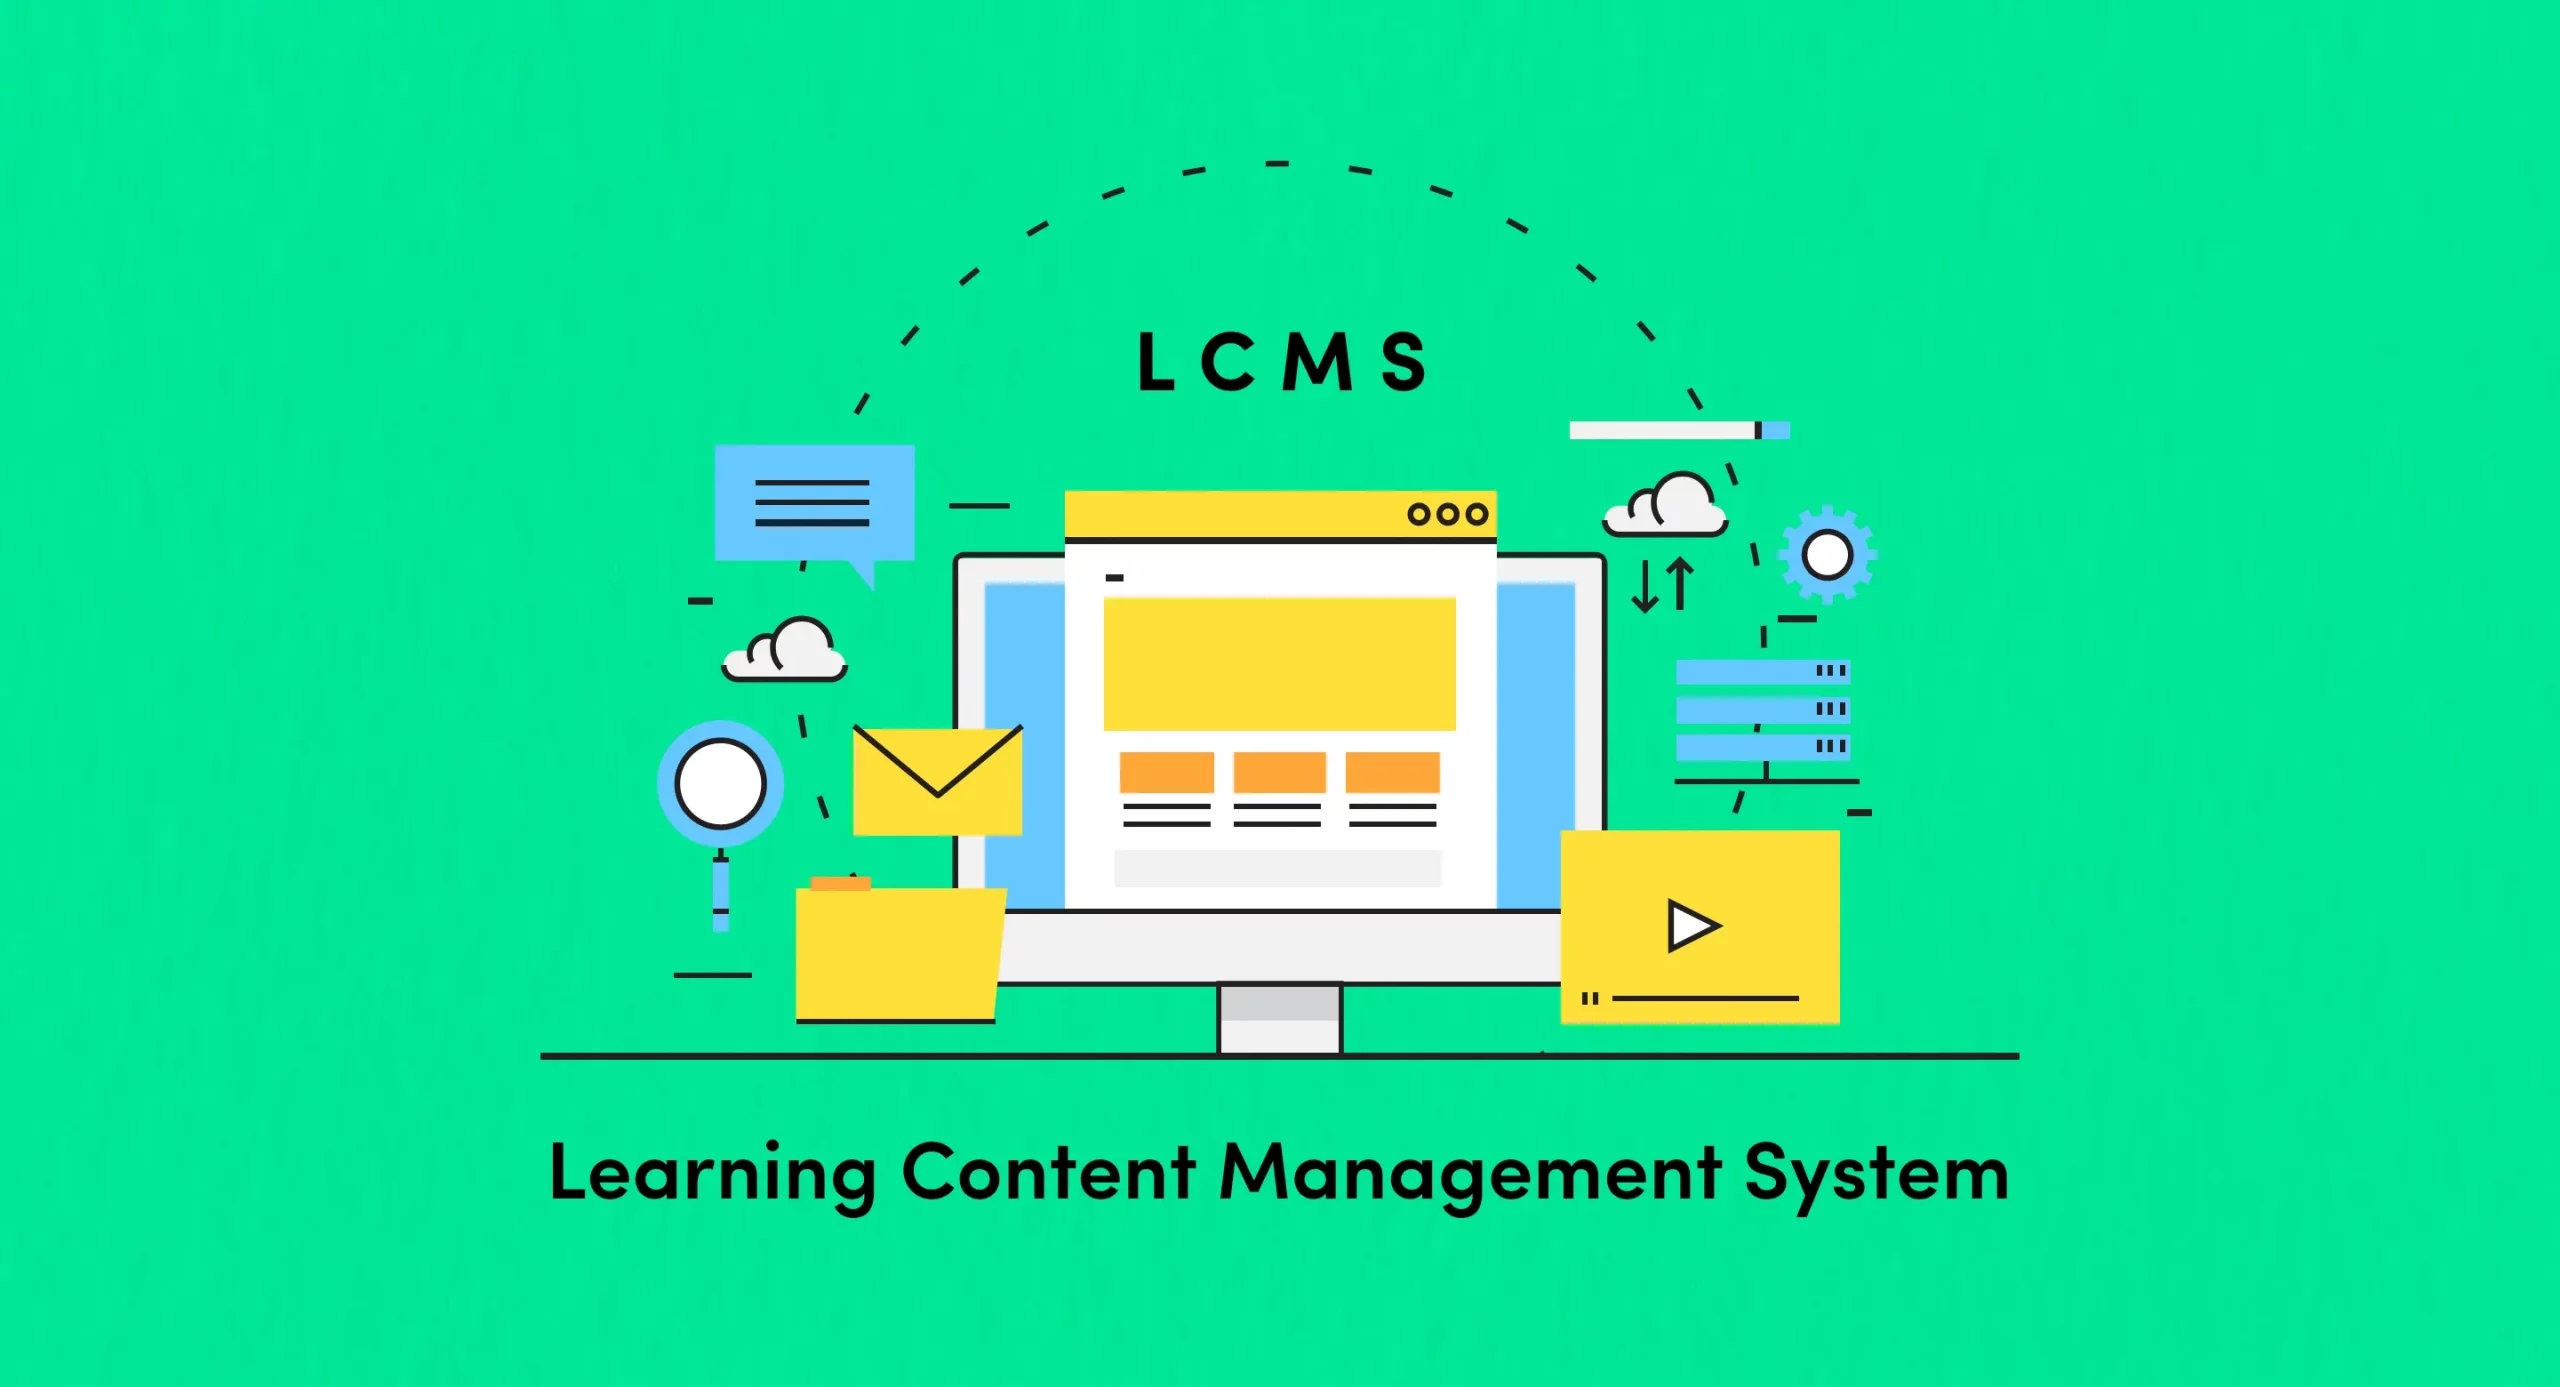 Learning Content Management System Software for Enterprise Companies